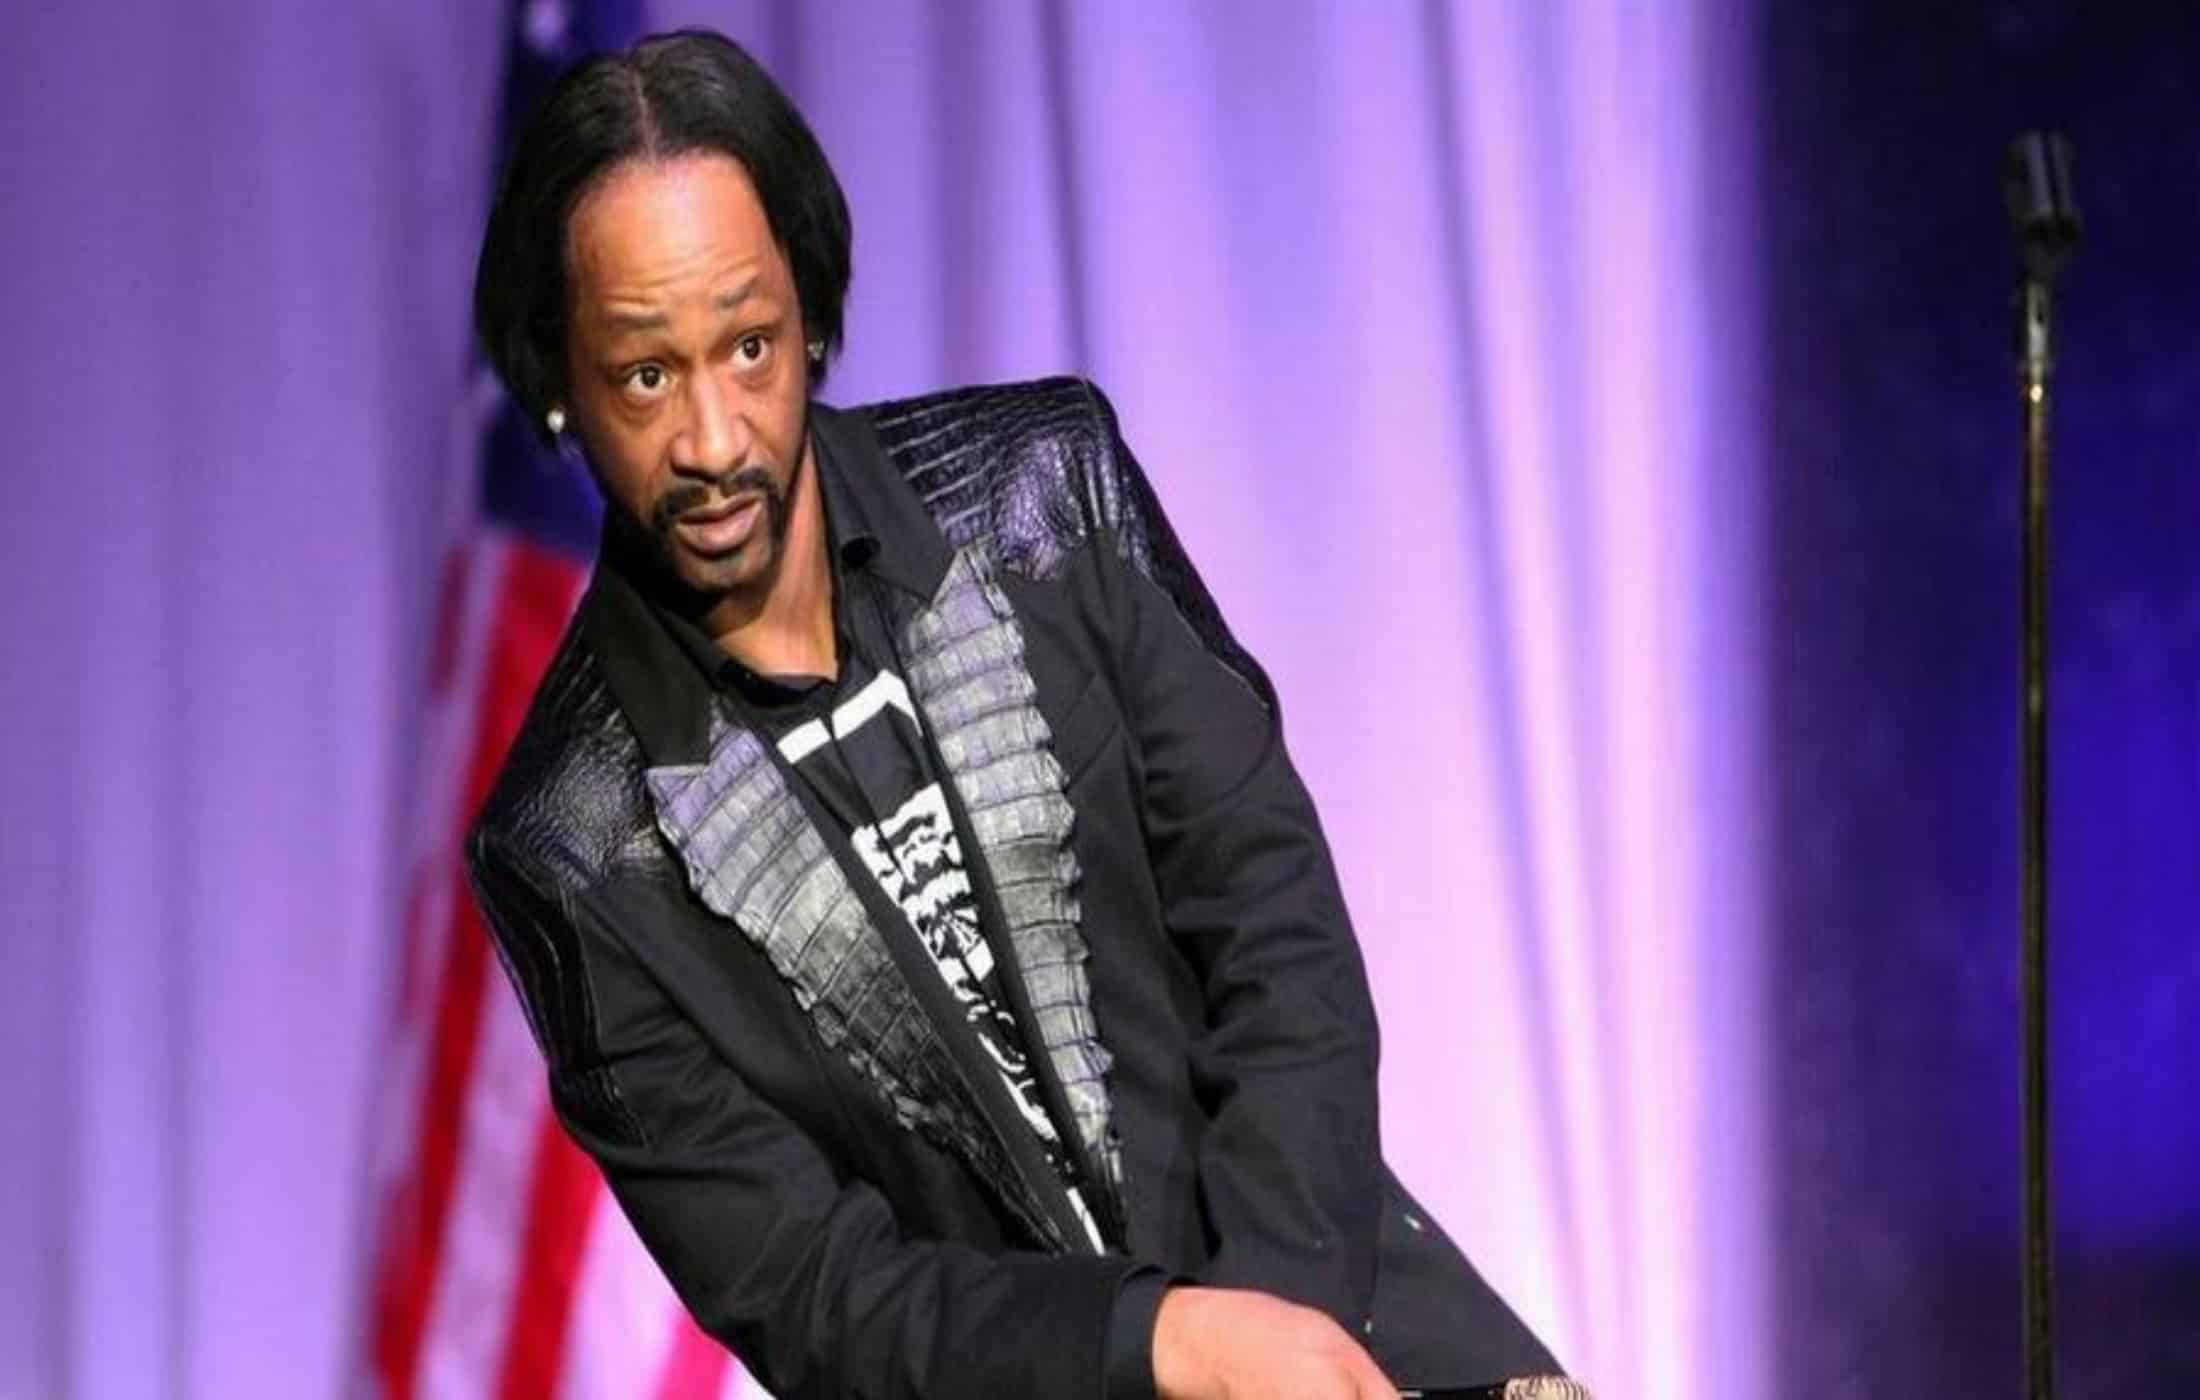 Katt Williams net worth, age, height, wiki, family, biography and